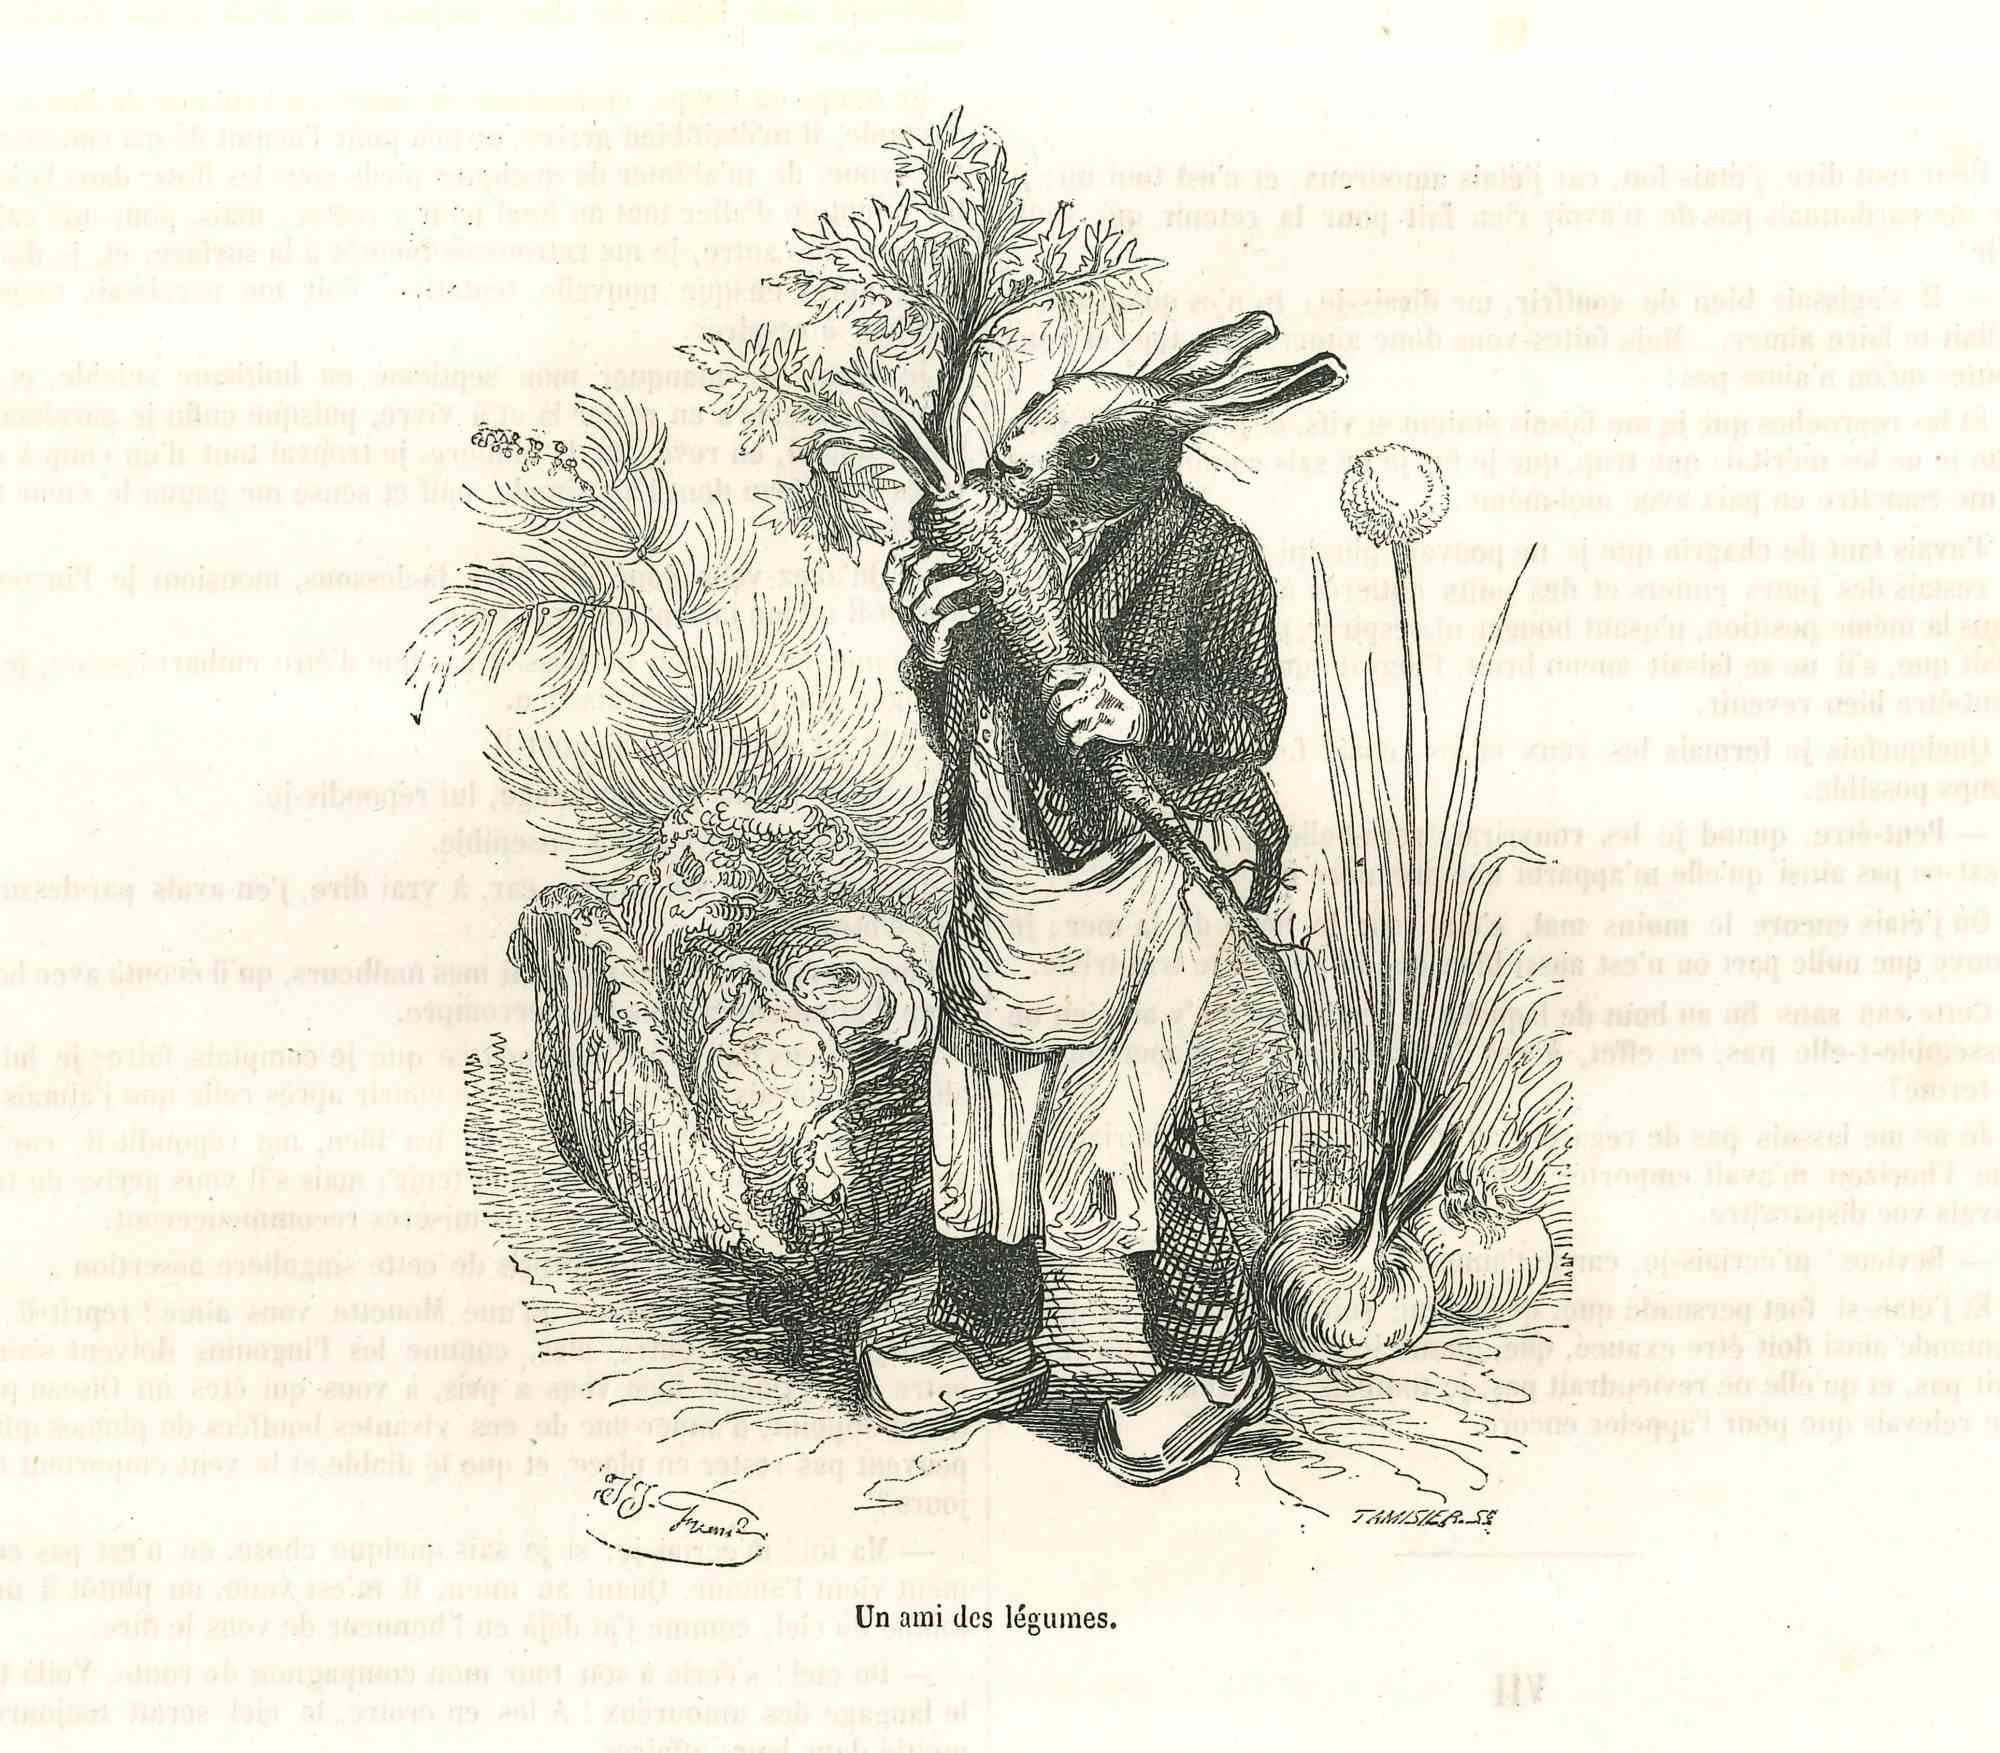 Jean Jeacques Grandville Animal Print - Mr. Bunny Eating A Big Carrot - Lithograph by J.J Grandville - 1852